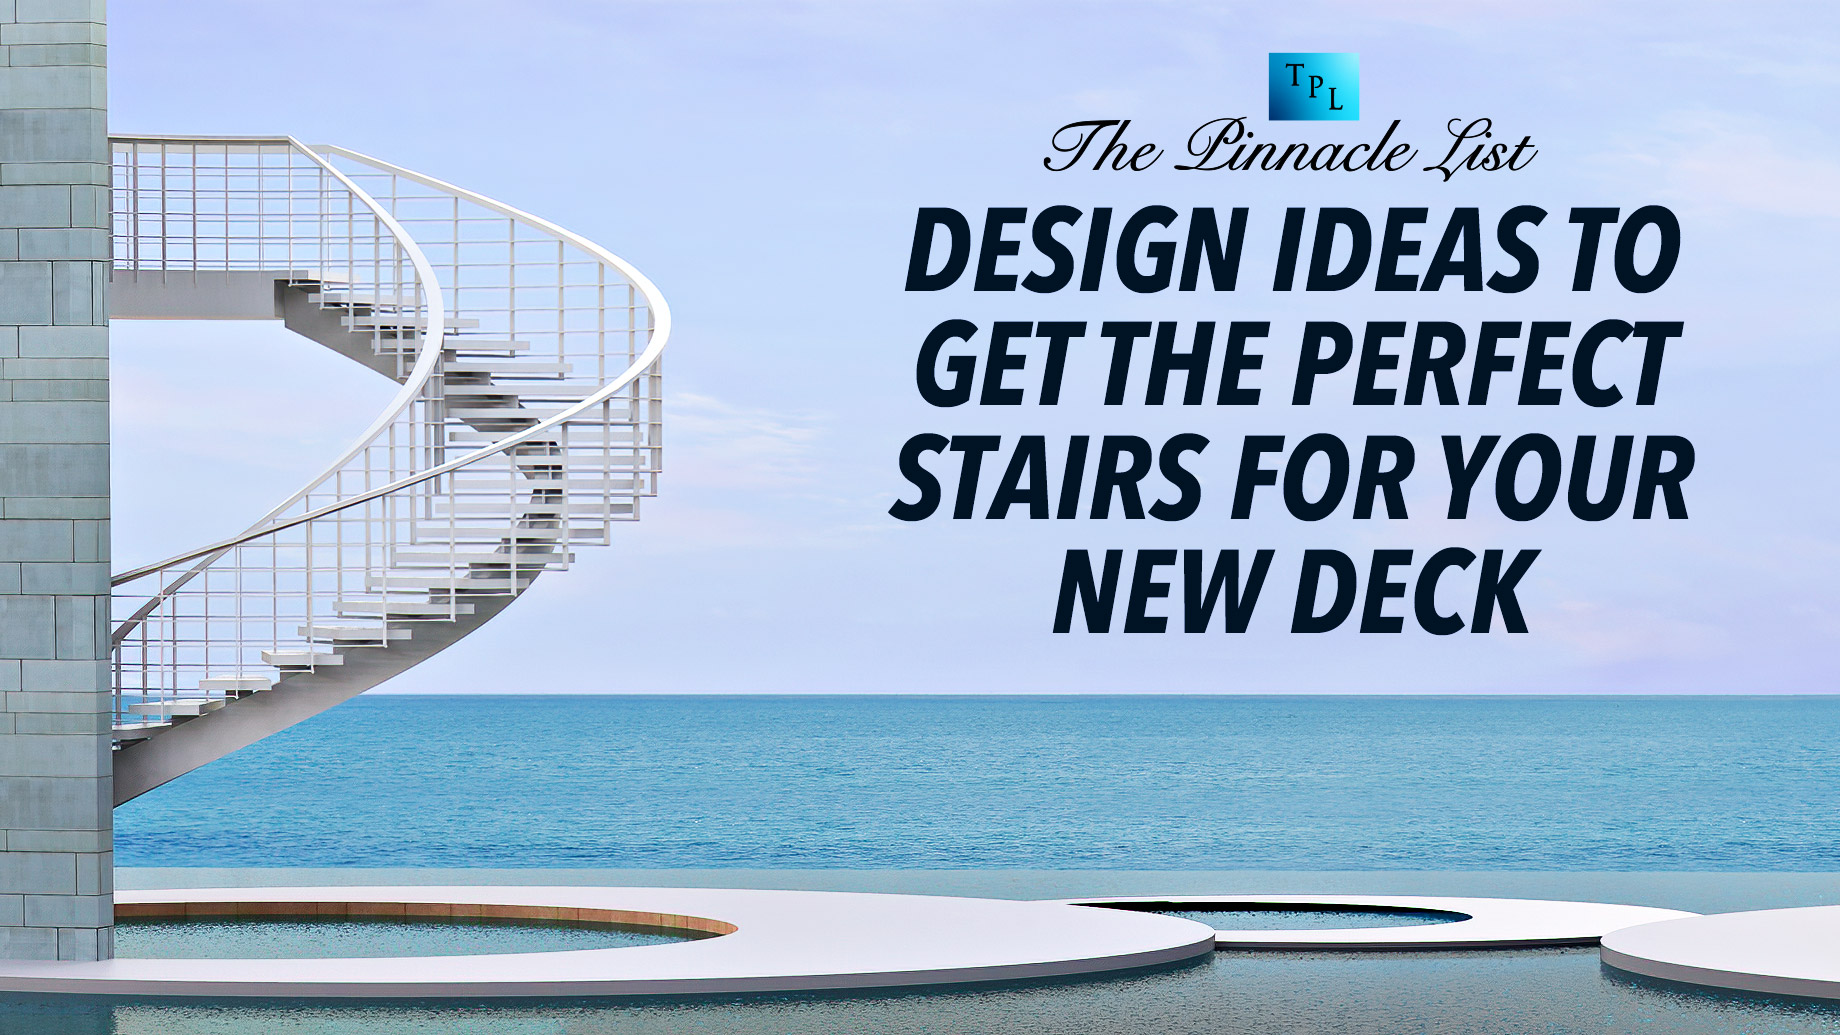 Design Ideas To Get The Perfect Stairs For Your New Deck